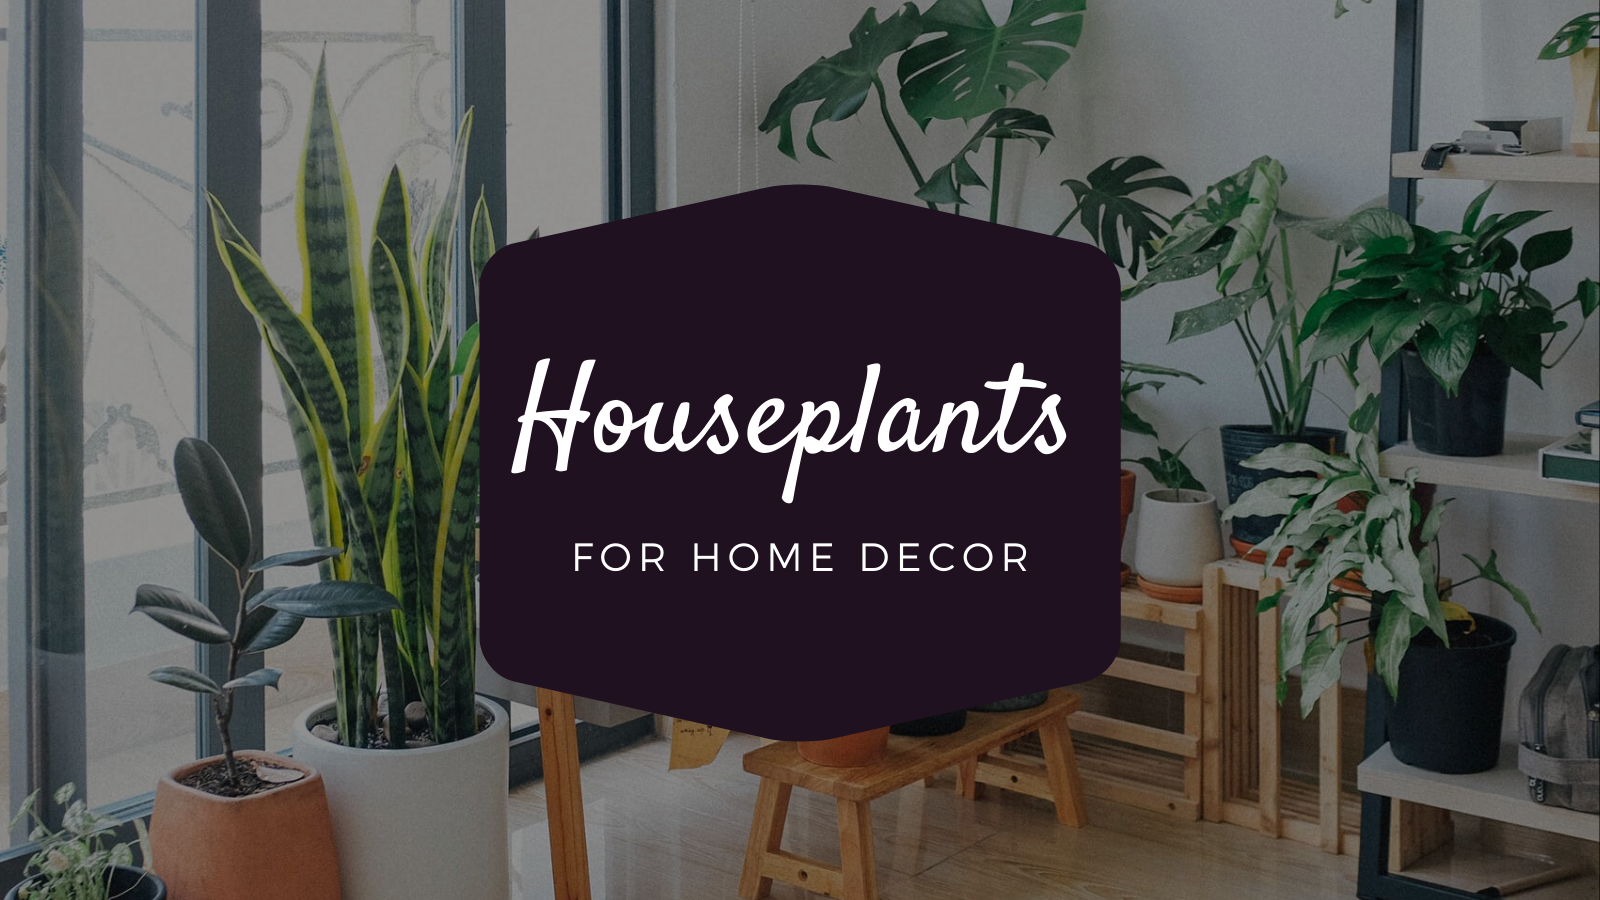 Which Houseplants Should You Buy for the Decoration of Your Home?